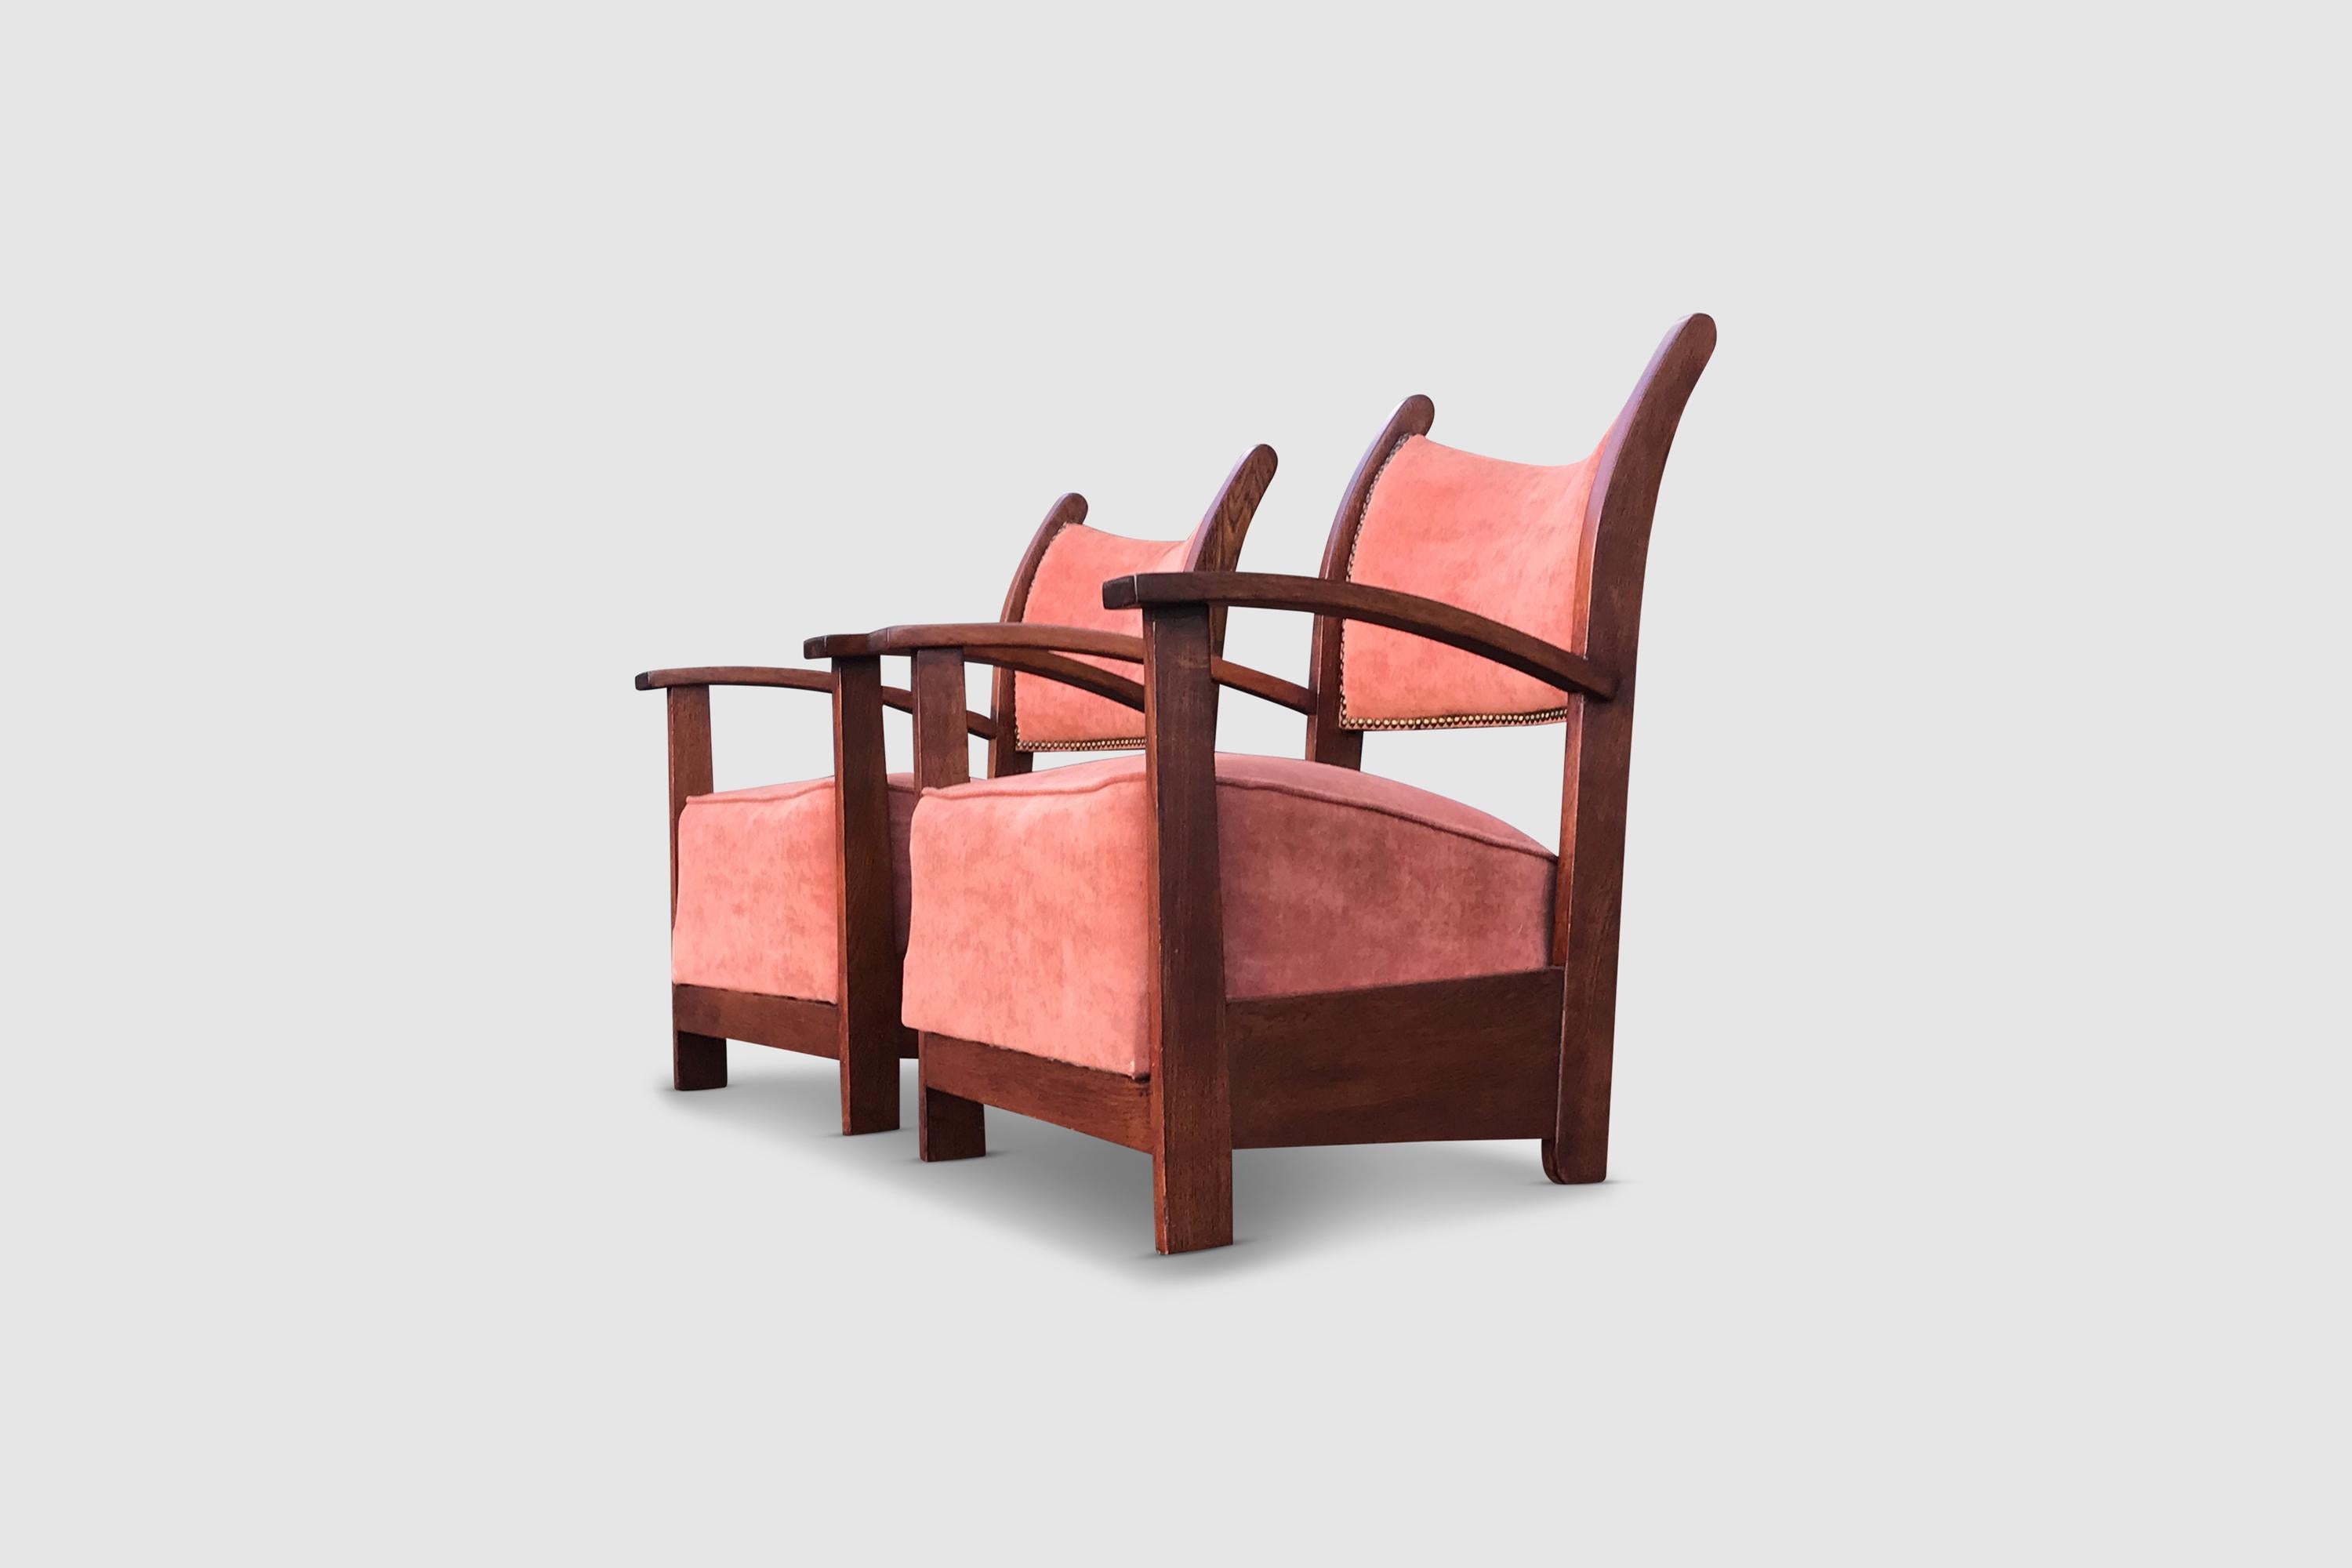 Very cool set of low armchairs in the manner of De Amsterdamse School from the art-deco period. Likely from the 1930s or 1940s.

The oak frame is bent in a very particular backwards shape and provides for a very interesting silhouette. The bent in